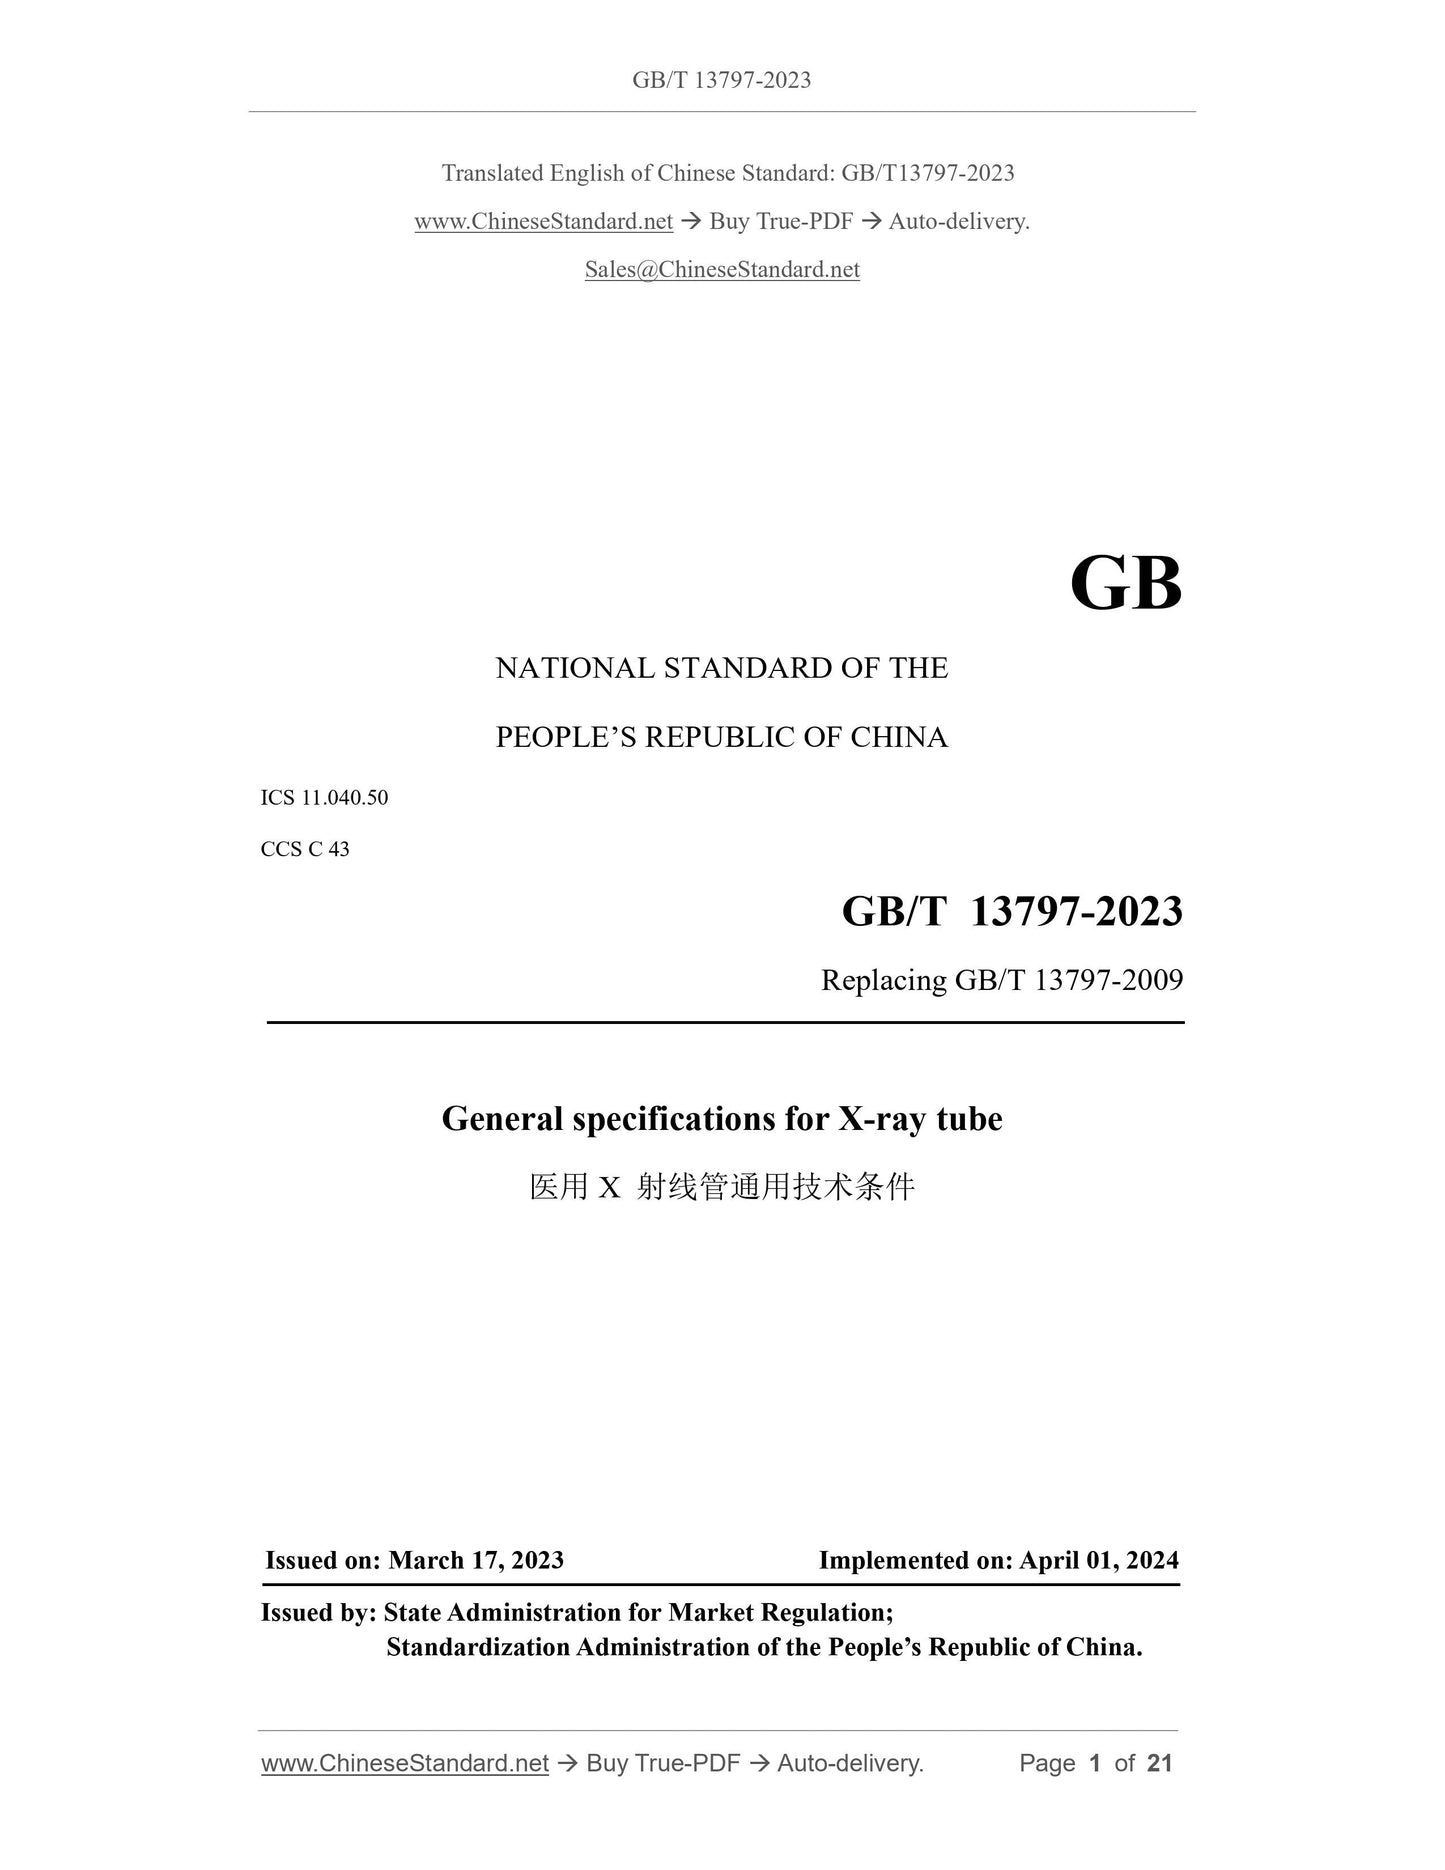 GB/T 13797-2023 Page 1